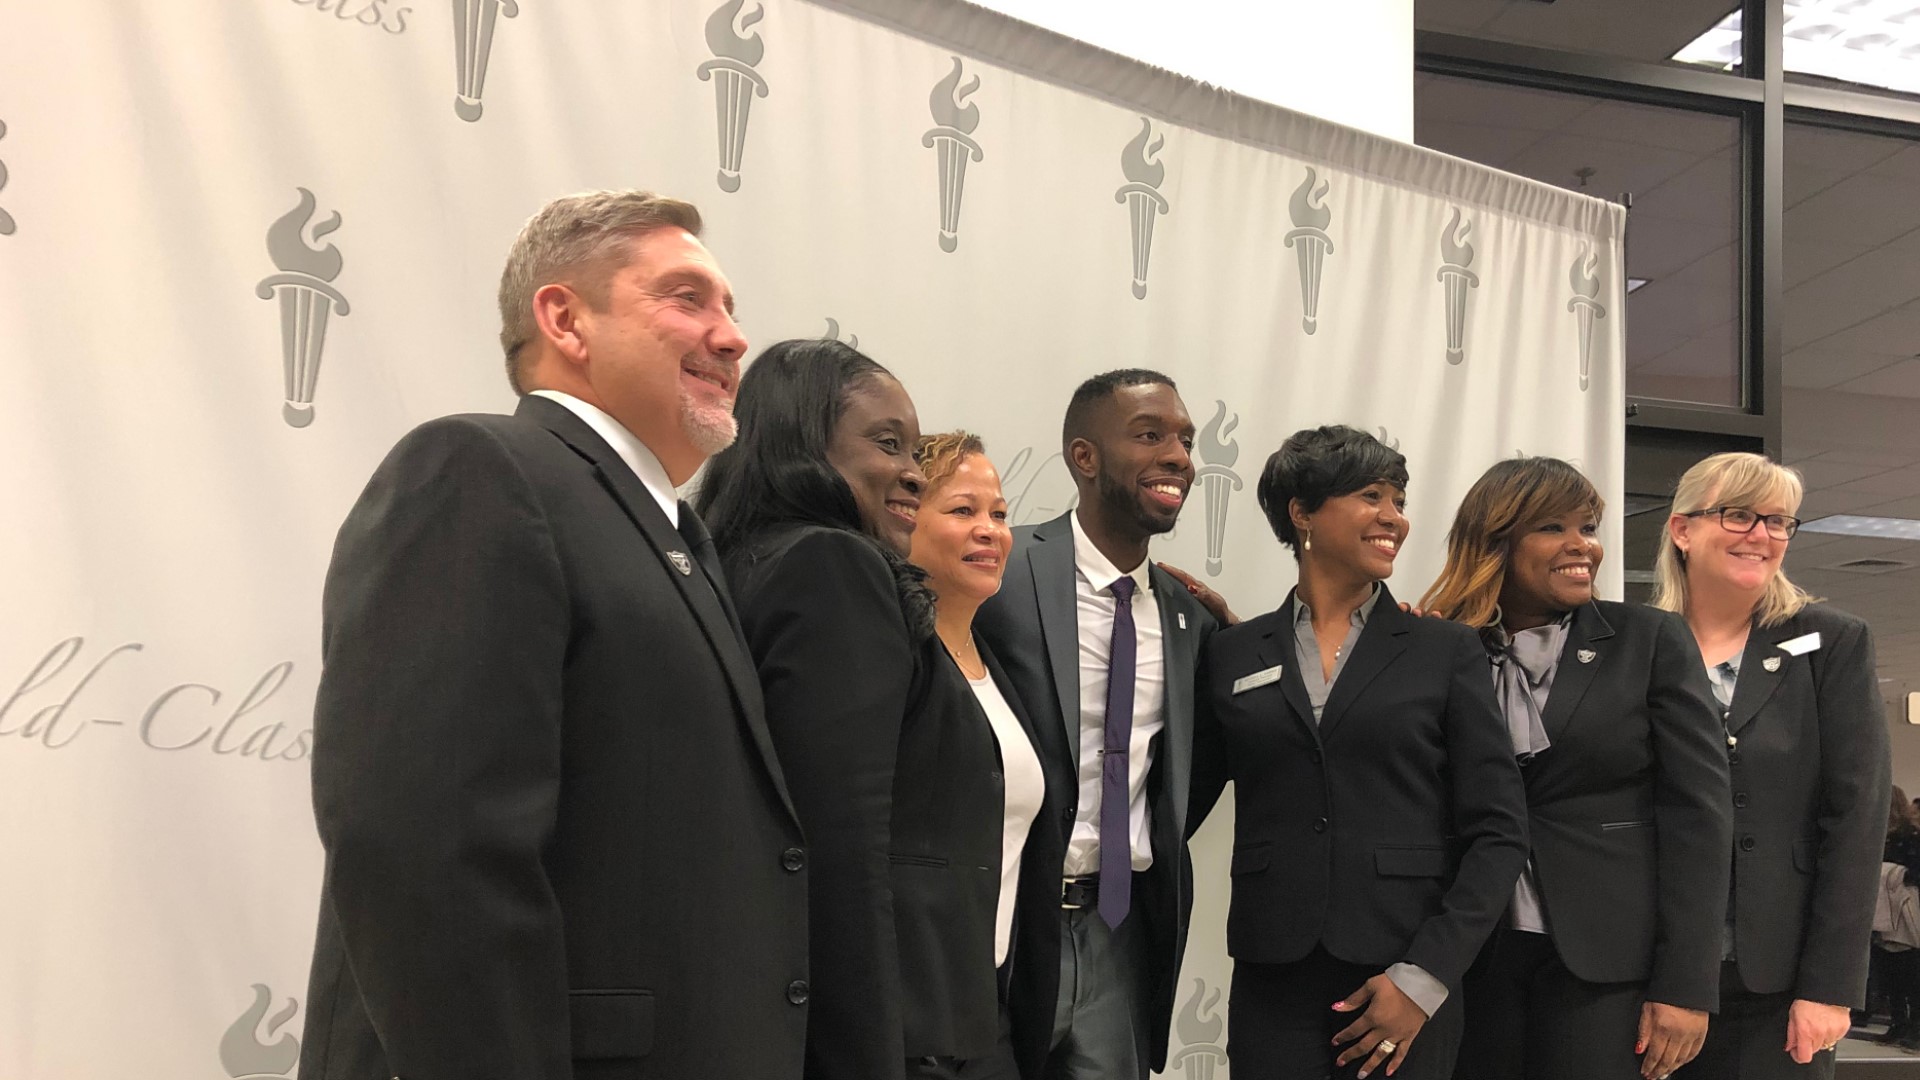 Thursday Gwinnett County Board of Education sworn in 26-year-old Everton Blair. Who is the first African American to serve on the school board.